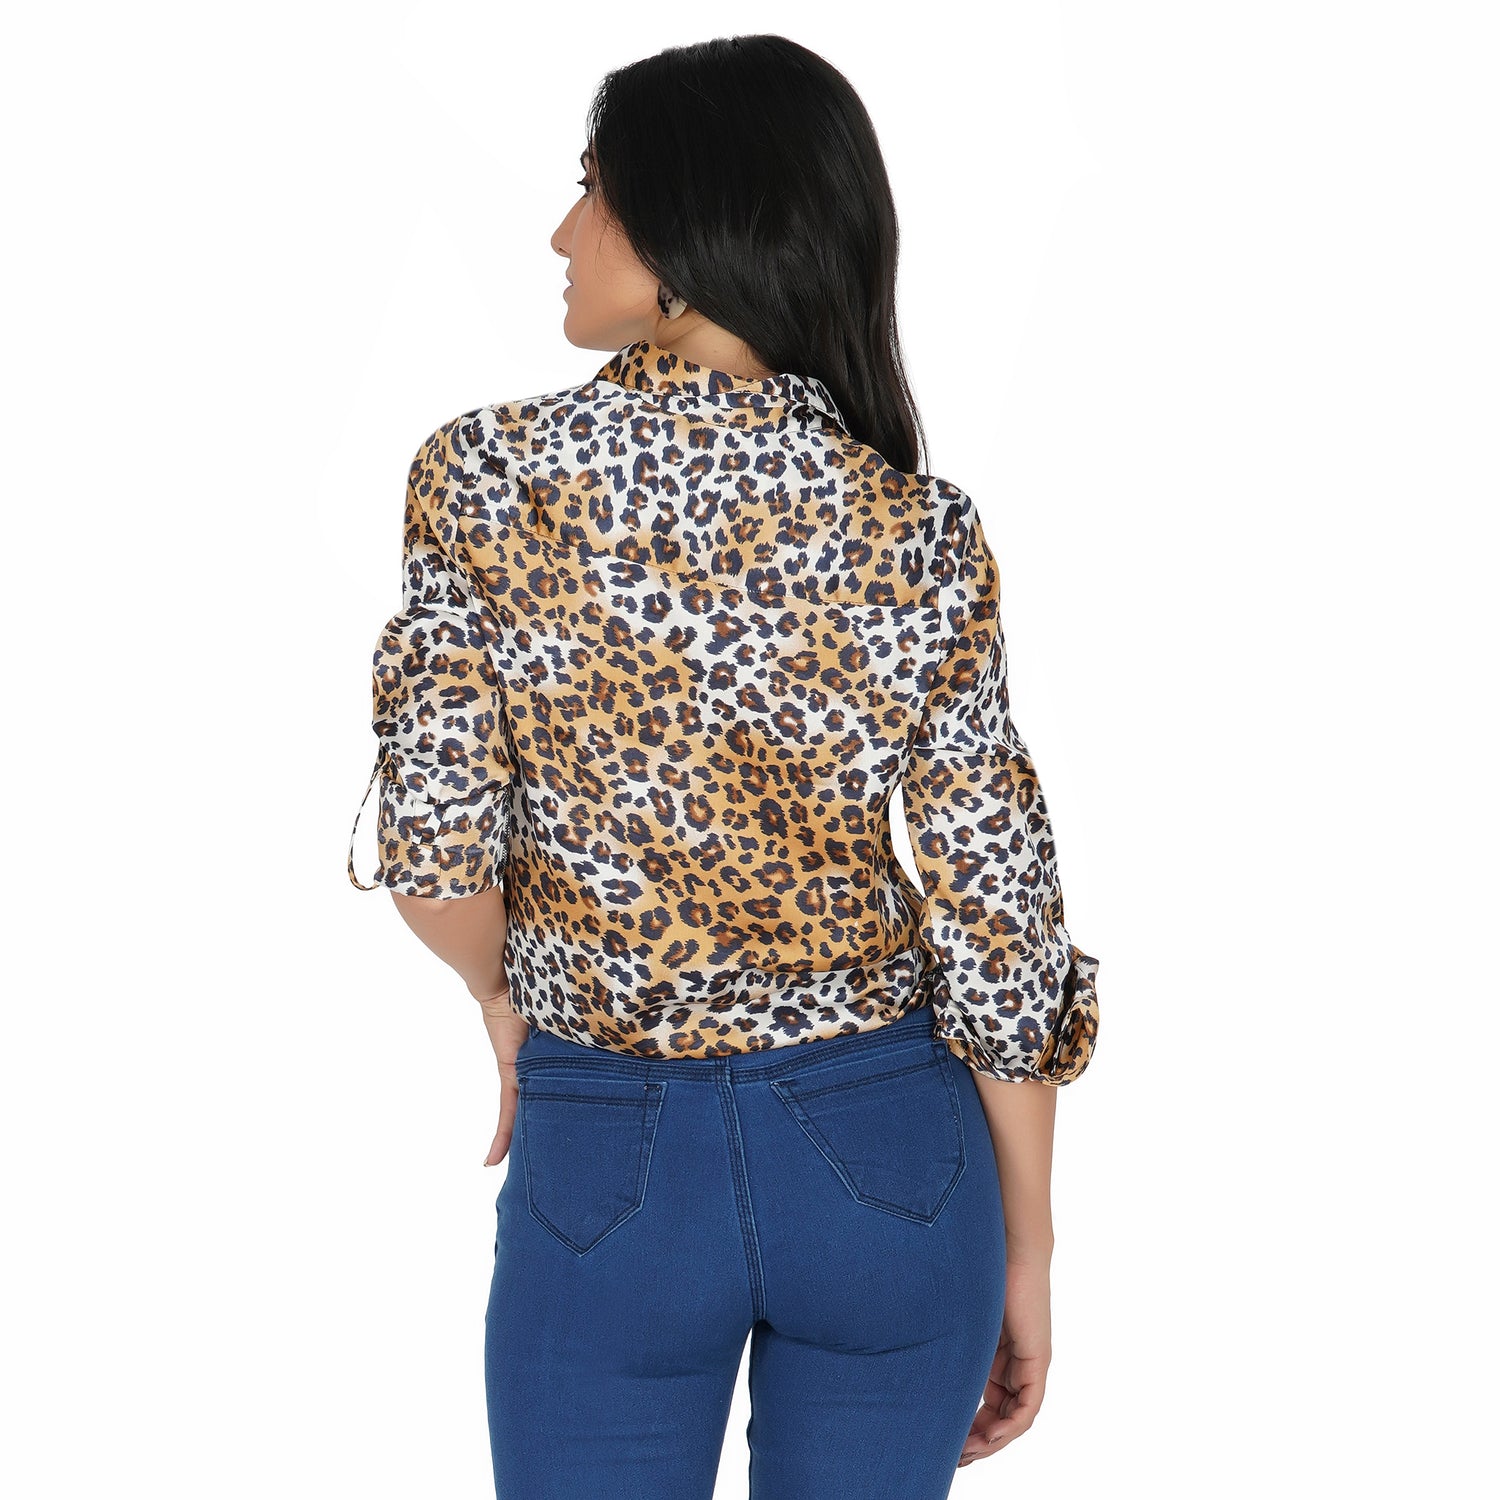 SLAY. Women's Animal Print Shirt with Front Tie Knot & Roll Up Sleeves-clothing-to-slay.myshopify.com-Leopard Print Shirt